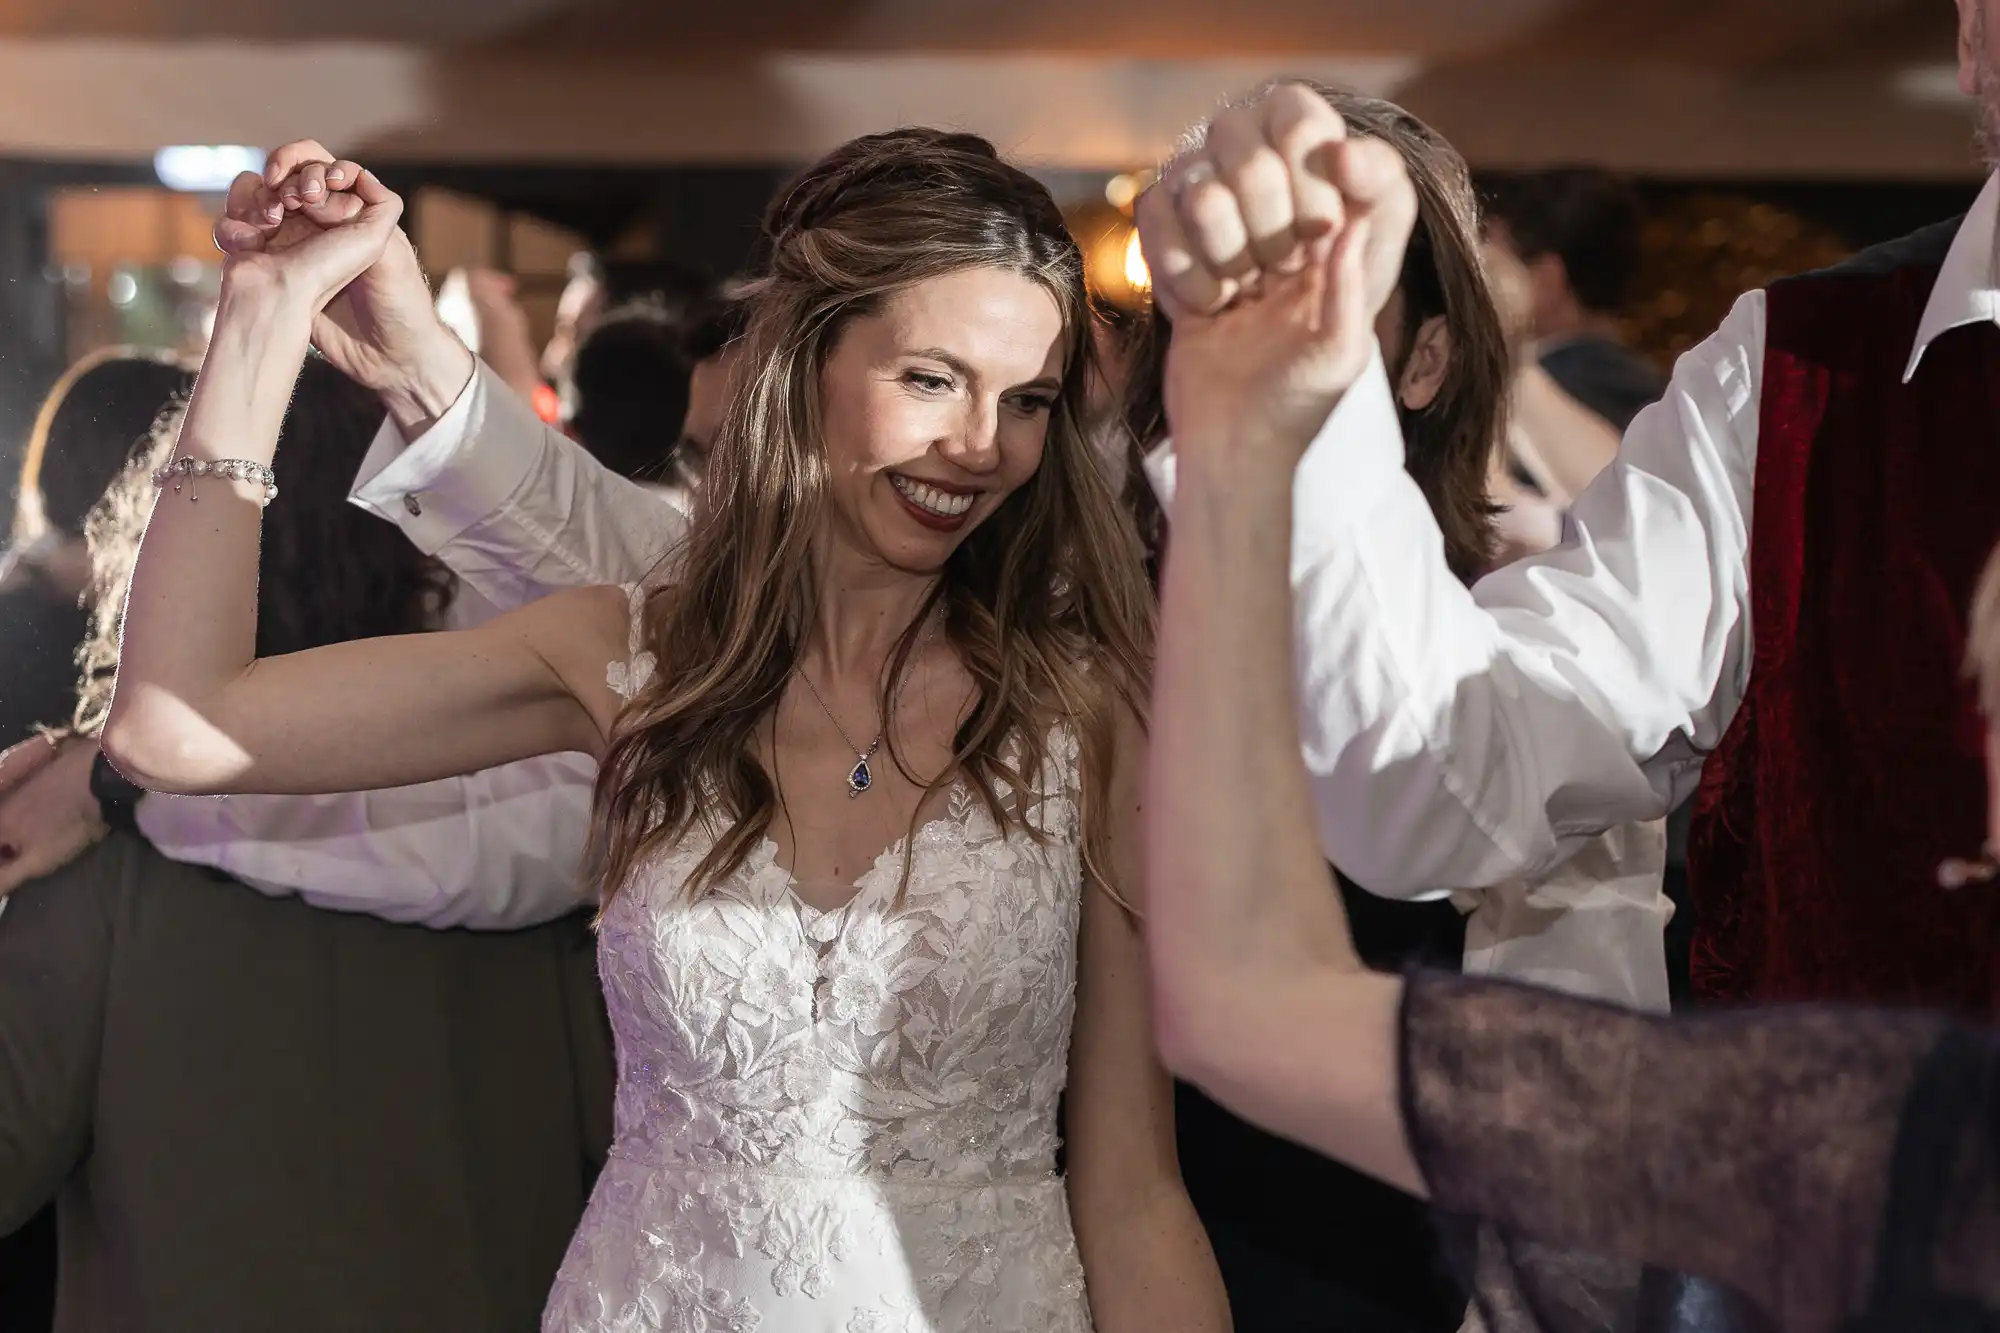 A bride in a white dress smiles while holding hands with others in a dancing circle at a wedding reception.